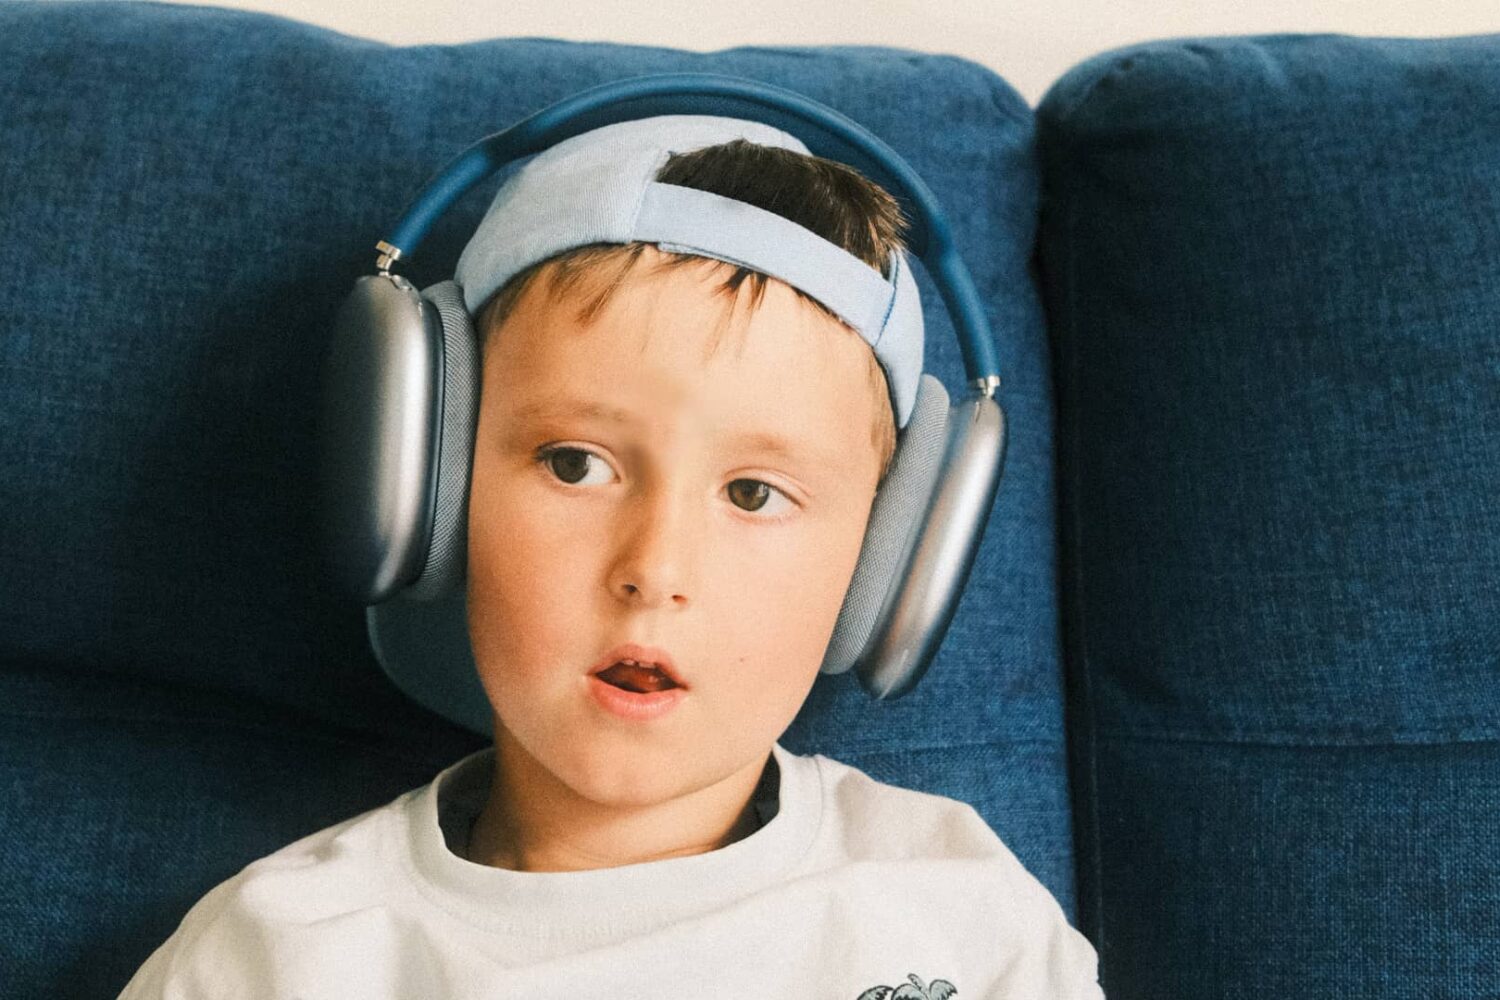 Little boy sitting on a couch, wearing AirPods Max headphones